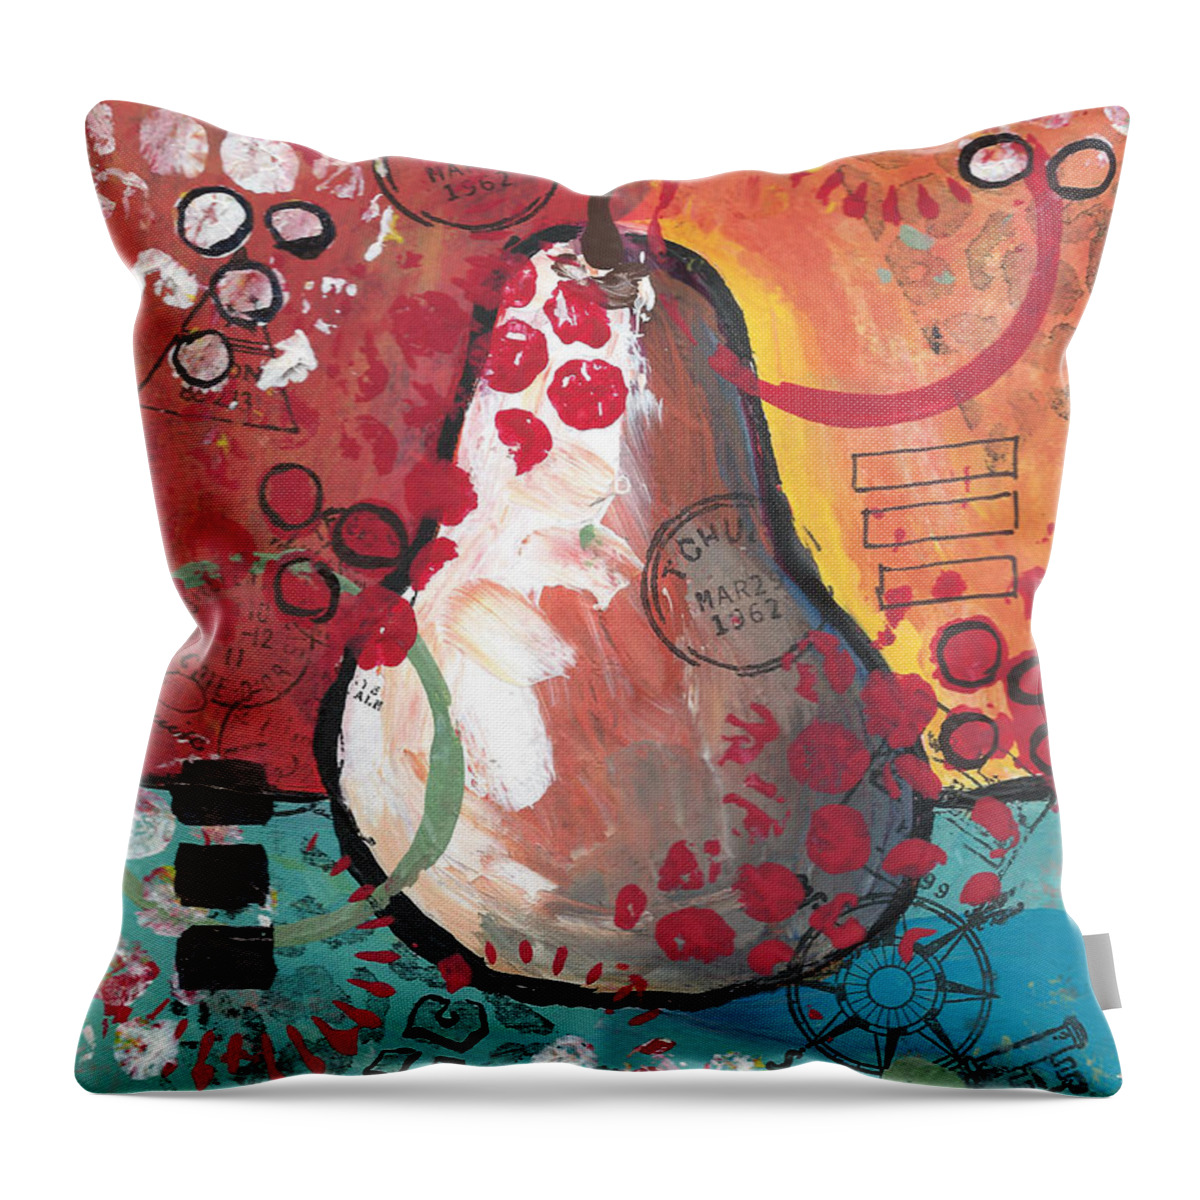 Pear Throw Pillow featuring the painting Pear 9 by Elise Boam